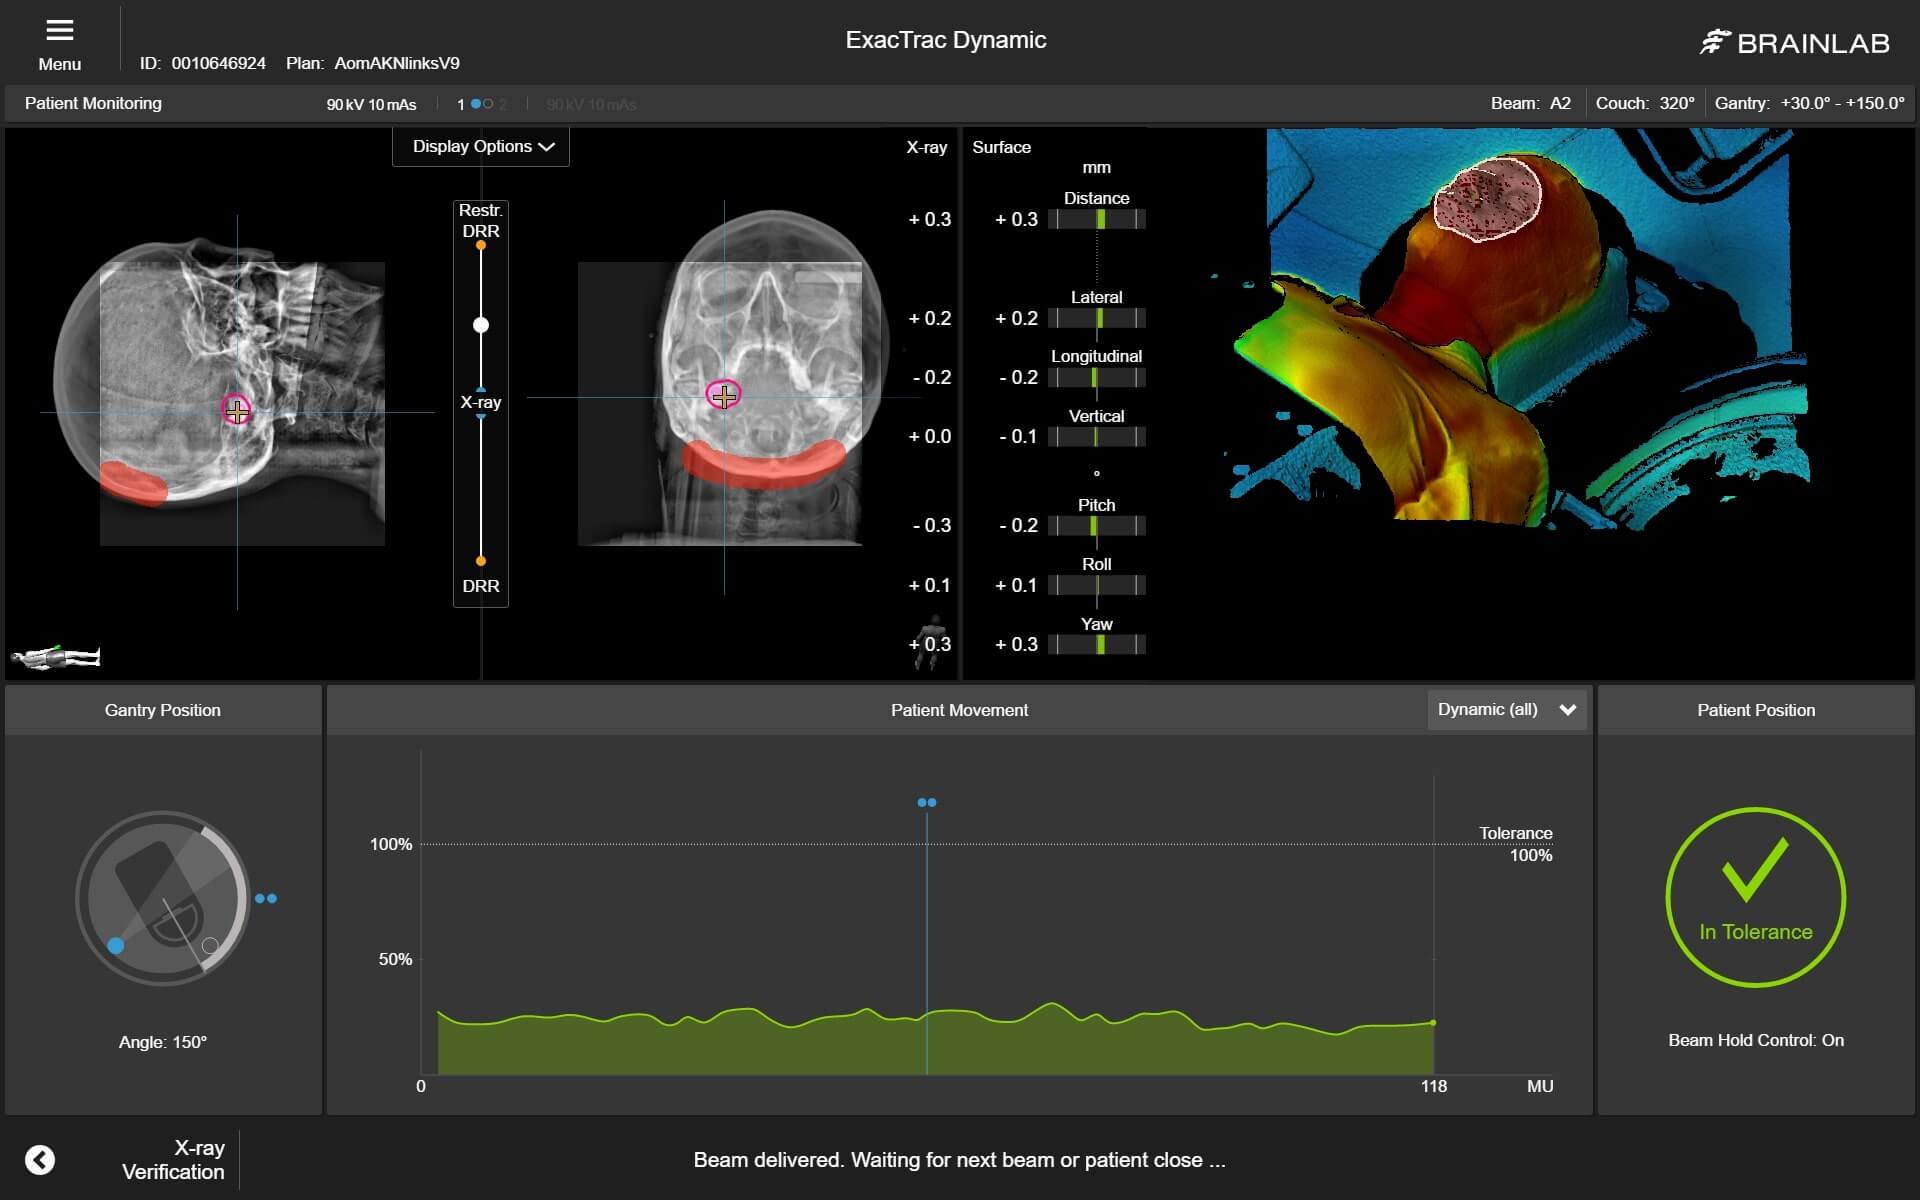 exactrac-dynamic-patient-monitoring.jpg